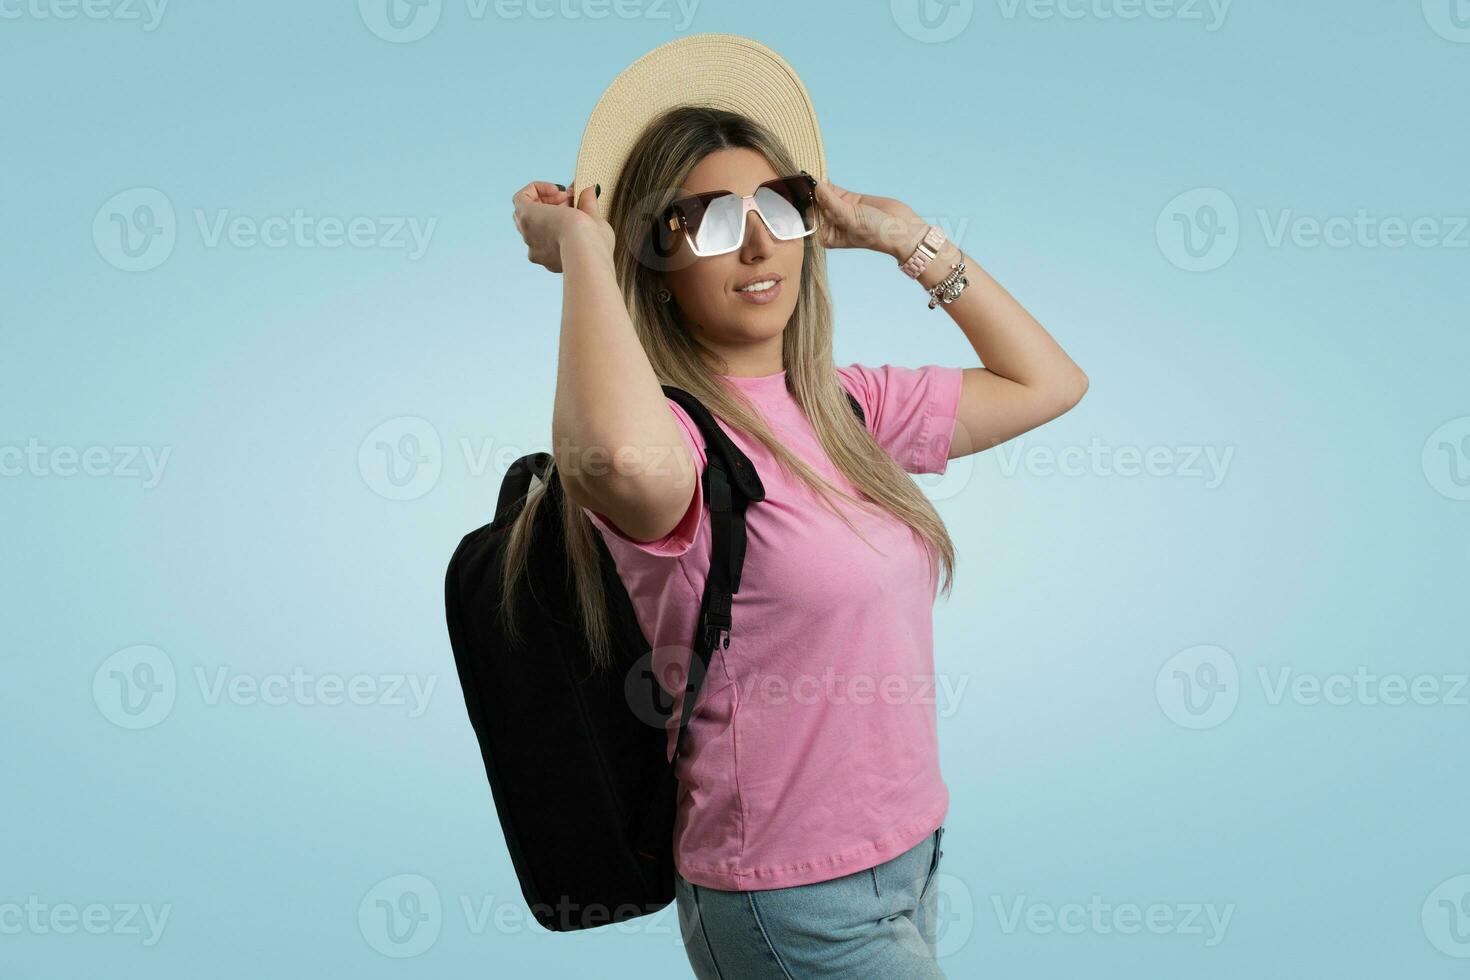 Smiling Woman in Casual Clothing with Blue Cap and Sunglasses Against Colored Backdrop photo